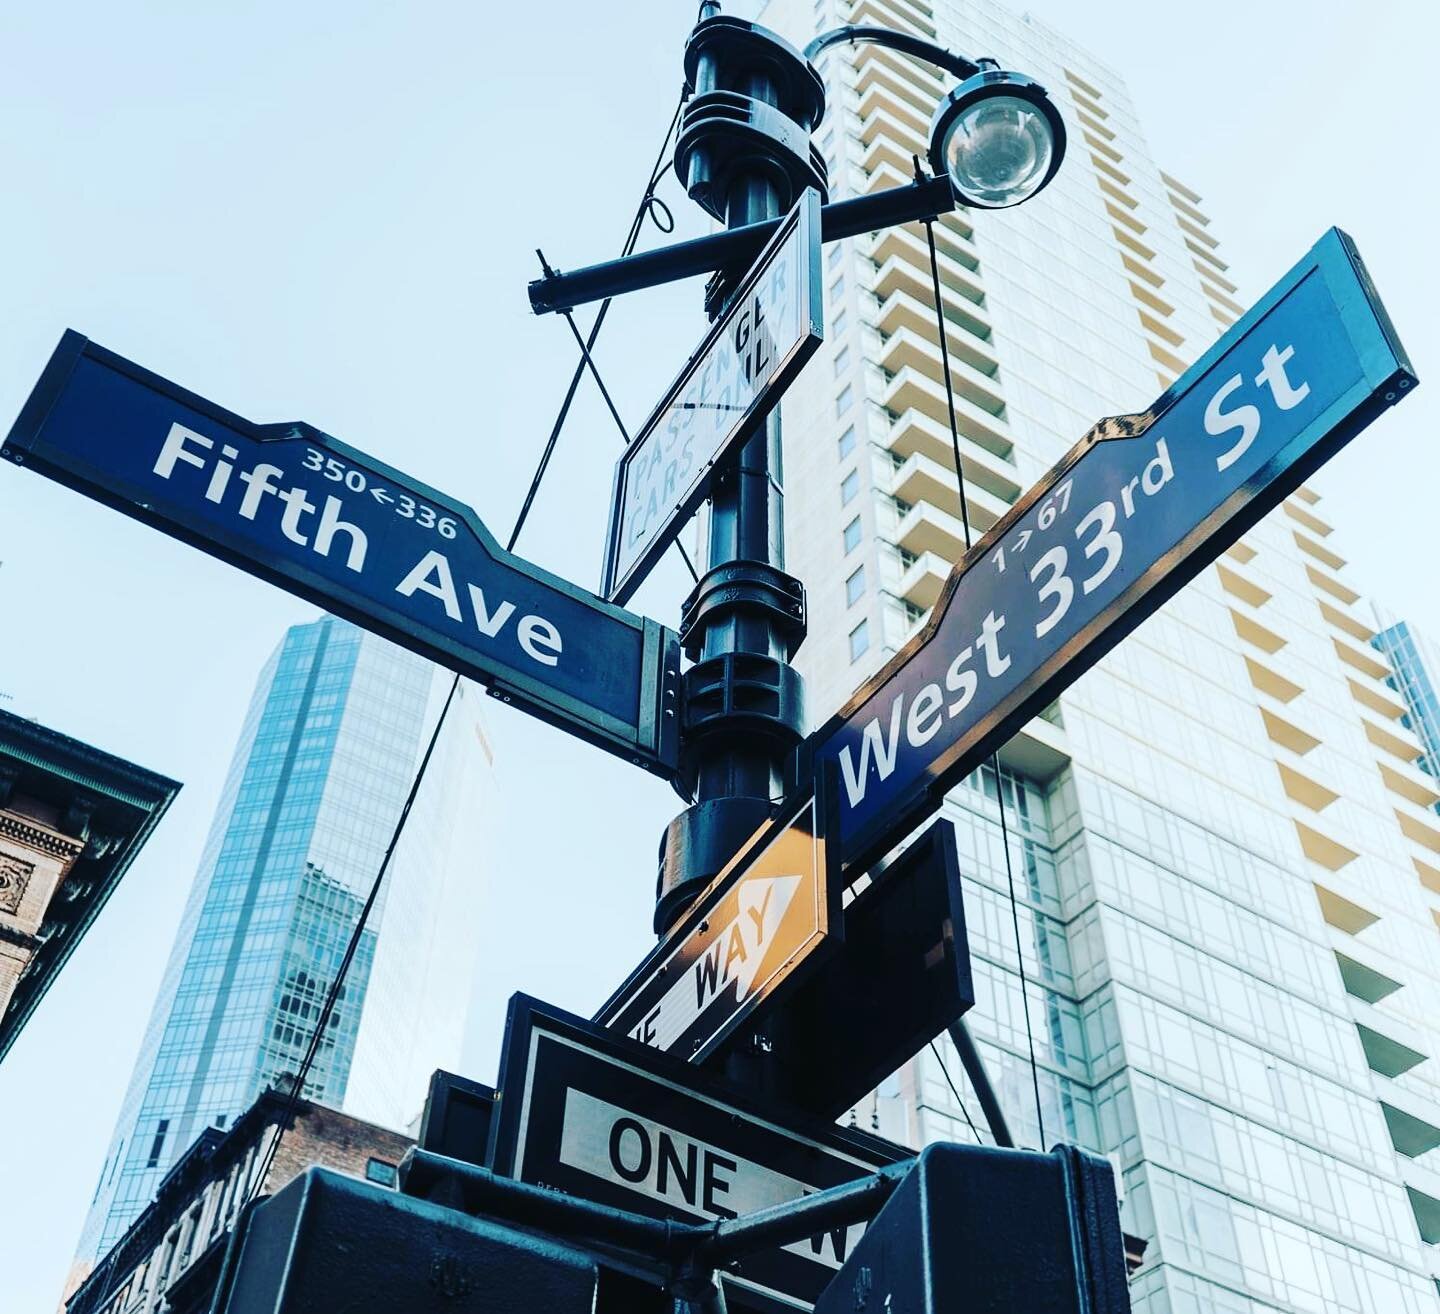 Fifth Avenue until we meet again and in the words of fashion icon Vivienne Westwood &quot;Fashion is very important. It is life-enhancing and, like everything that gives pleasure, it is worth doing well.&rdquo; 

#national_travel_australia #travelmem